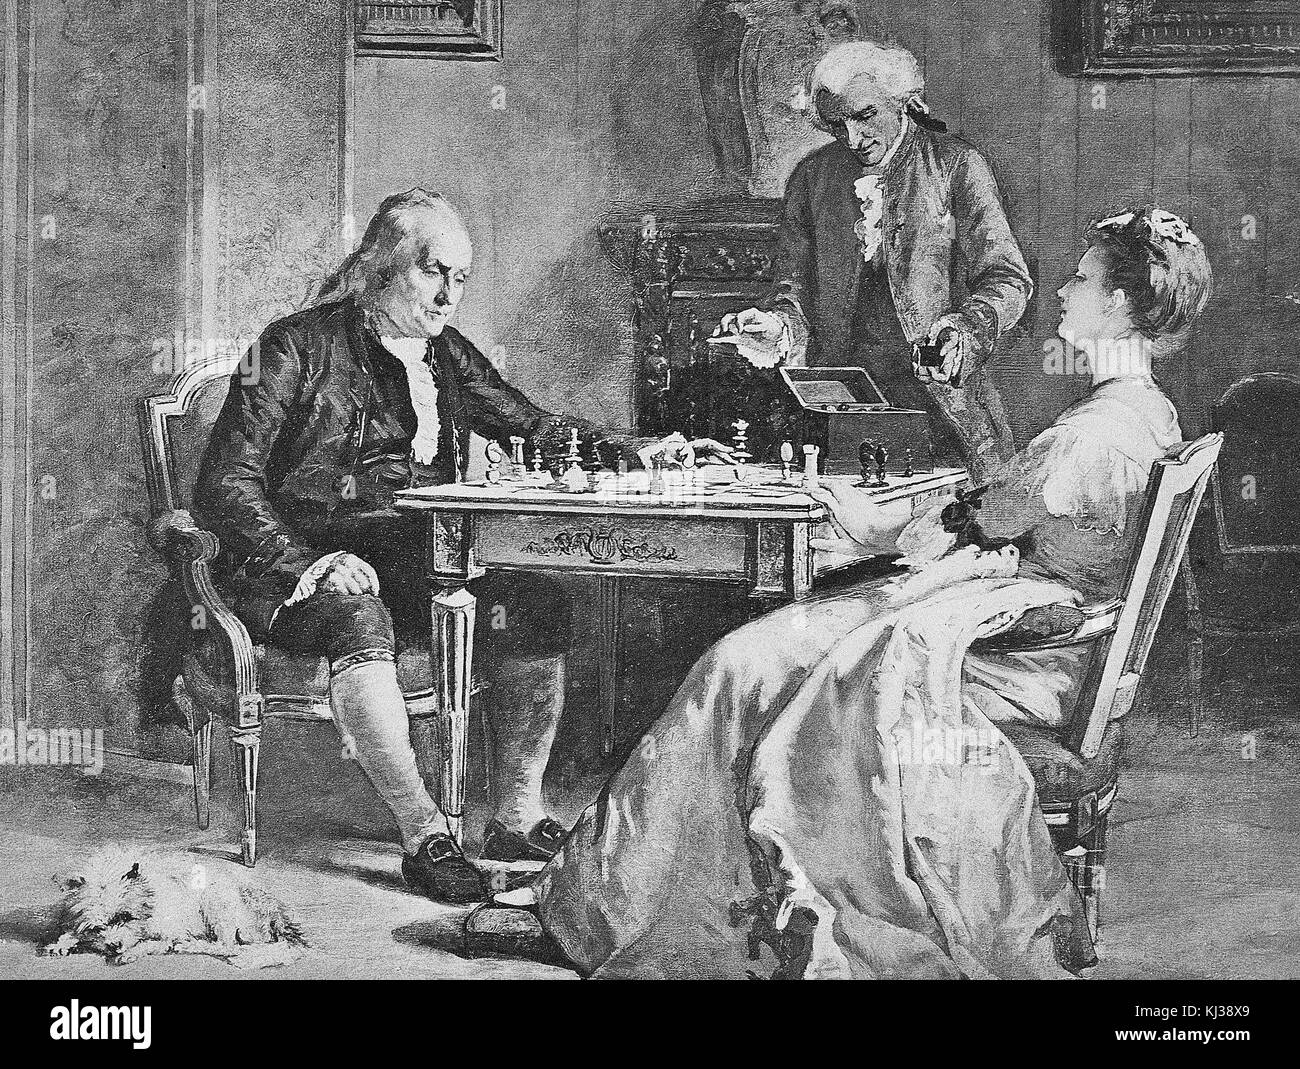 A painting of Benjamin Franklin playing chess with Lady Caroline Howe, the painting depicts Franklin being placed in checkmate by Lady Howe while a dog sleeps on the floor and Admiral Lord Richard Howe stands in the background, the chess games were the pretense under which Franklin met with the admiral, London, England, 1831. From the New York Public Library. Stock Photo